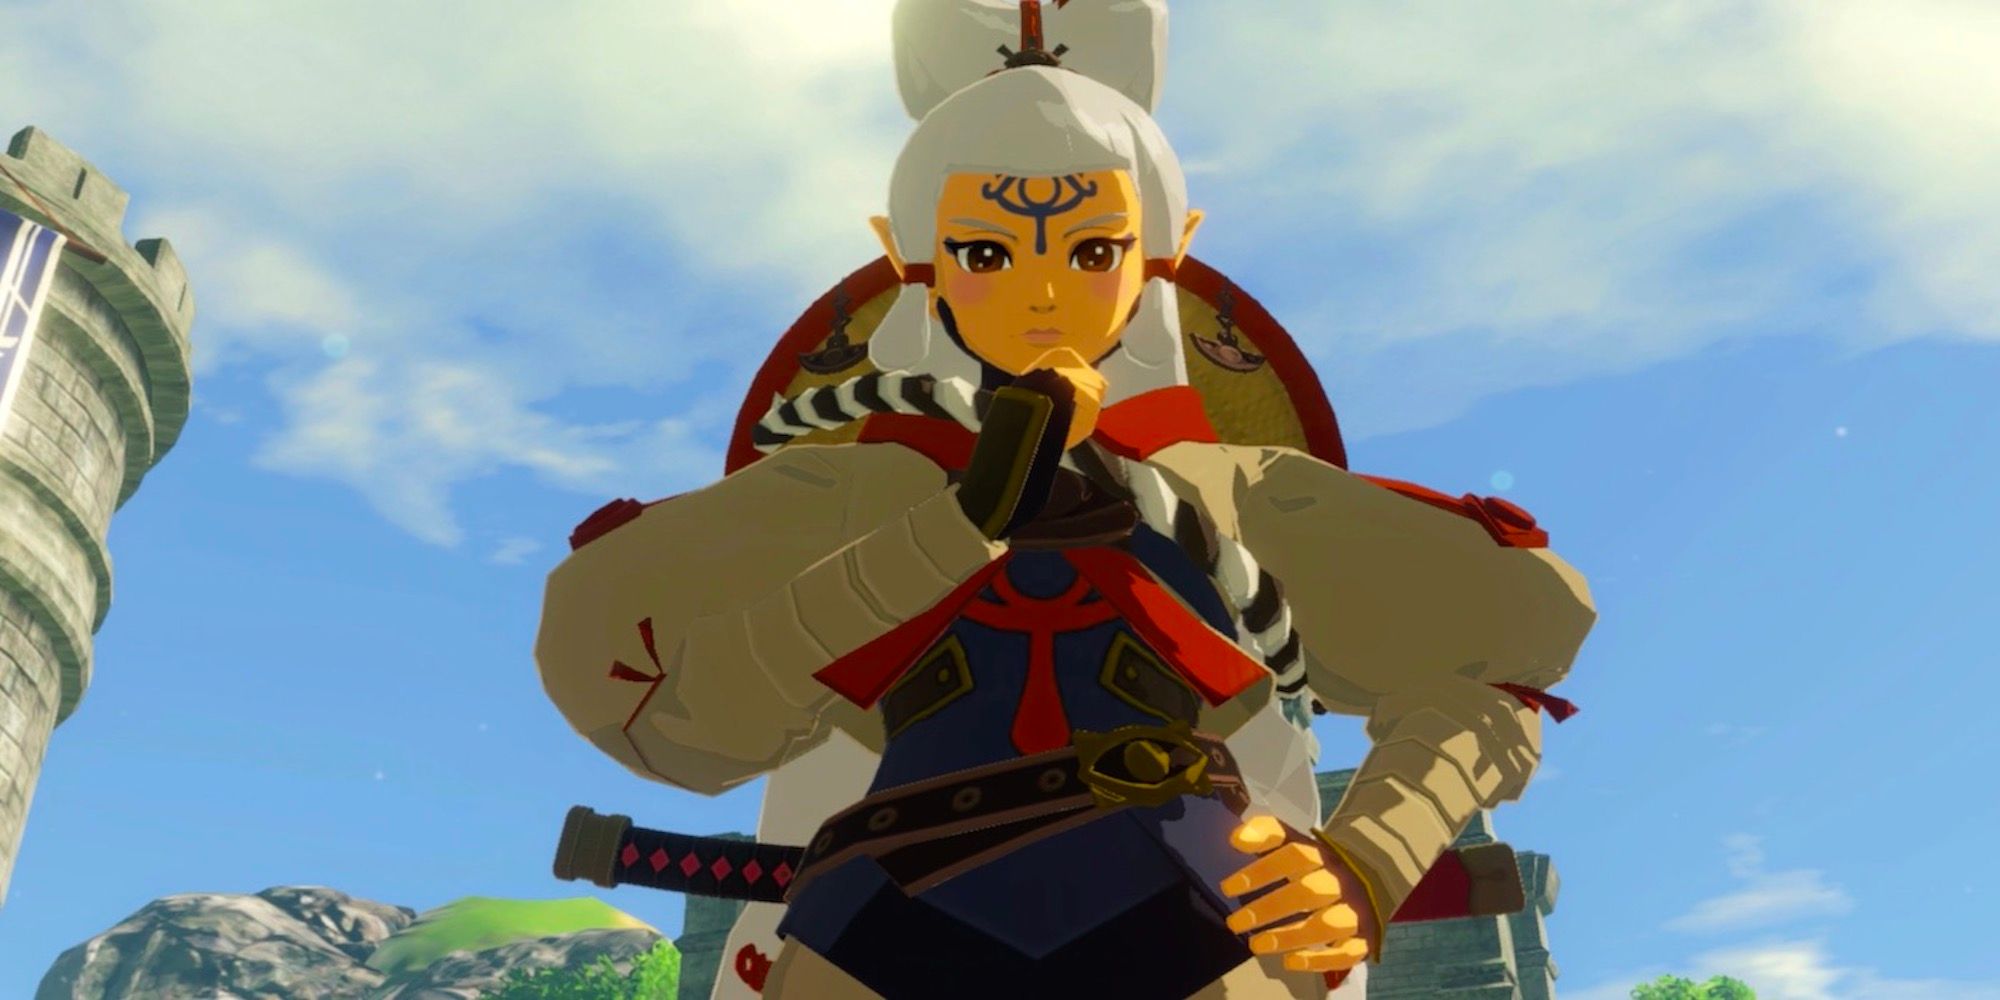 Impa from Hyrule Warriors Age of Calamity